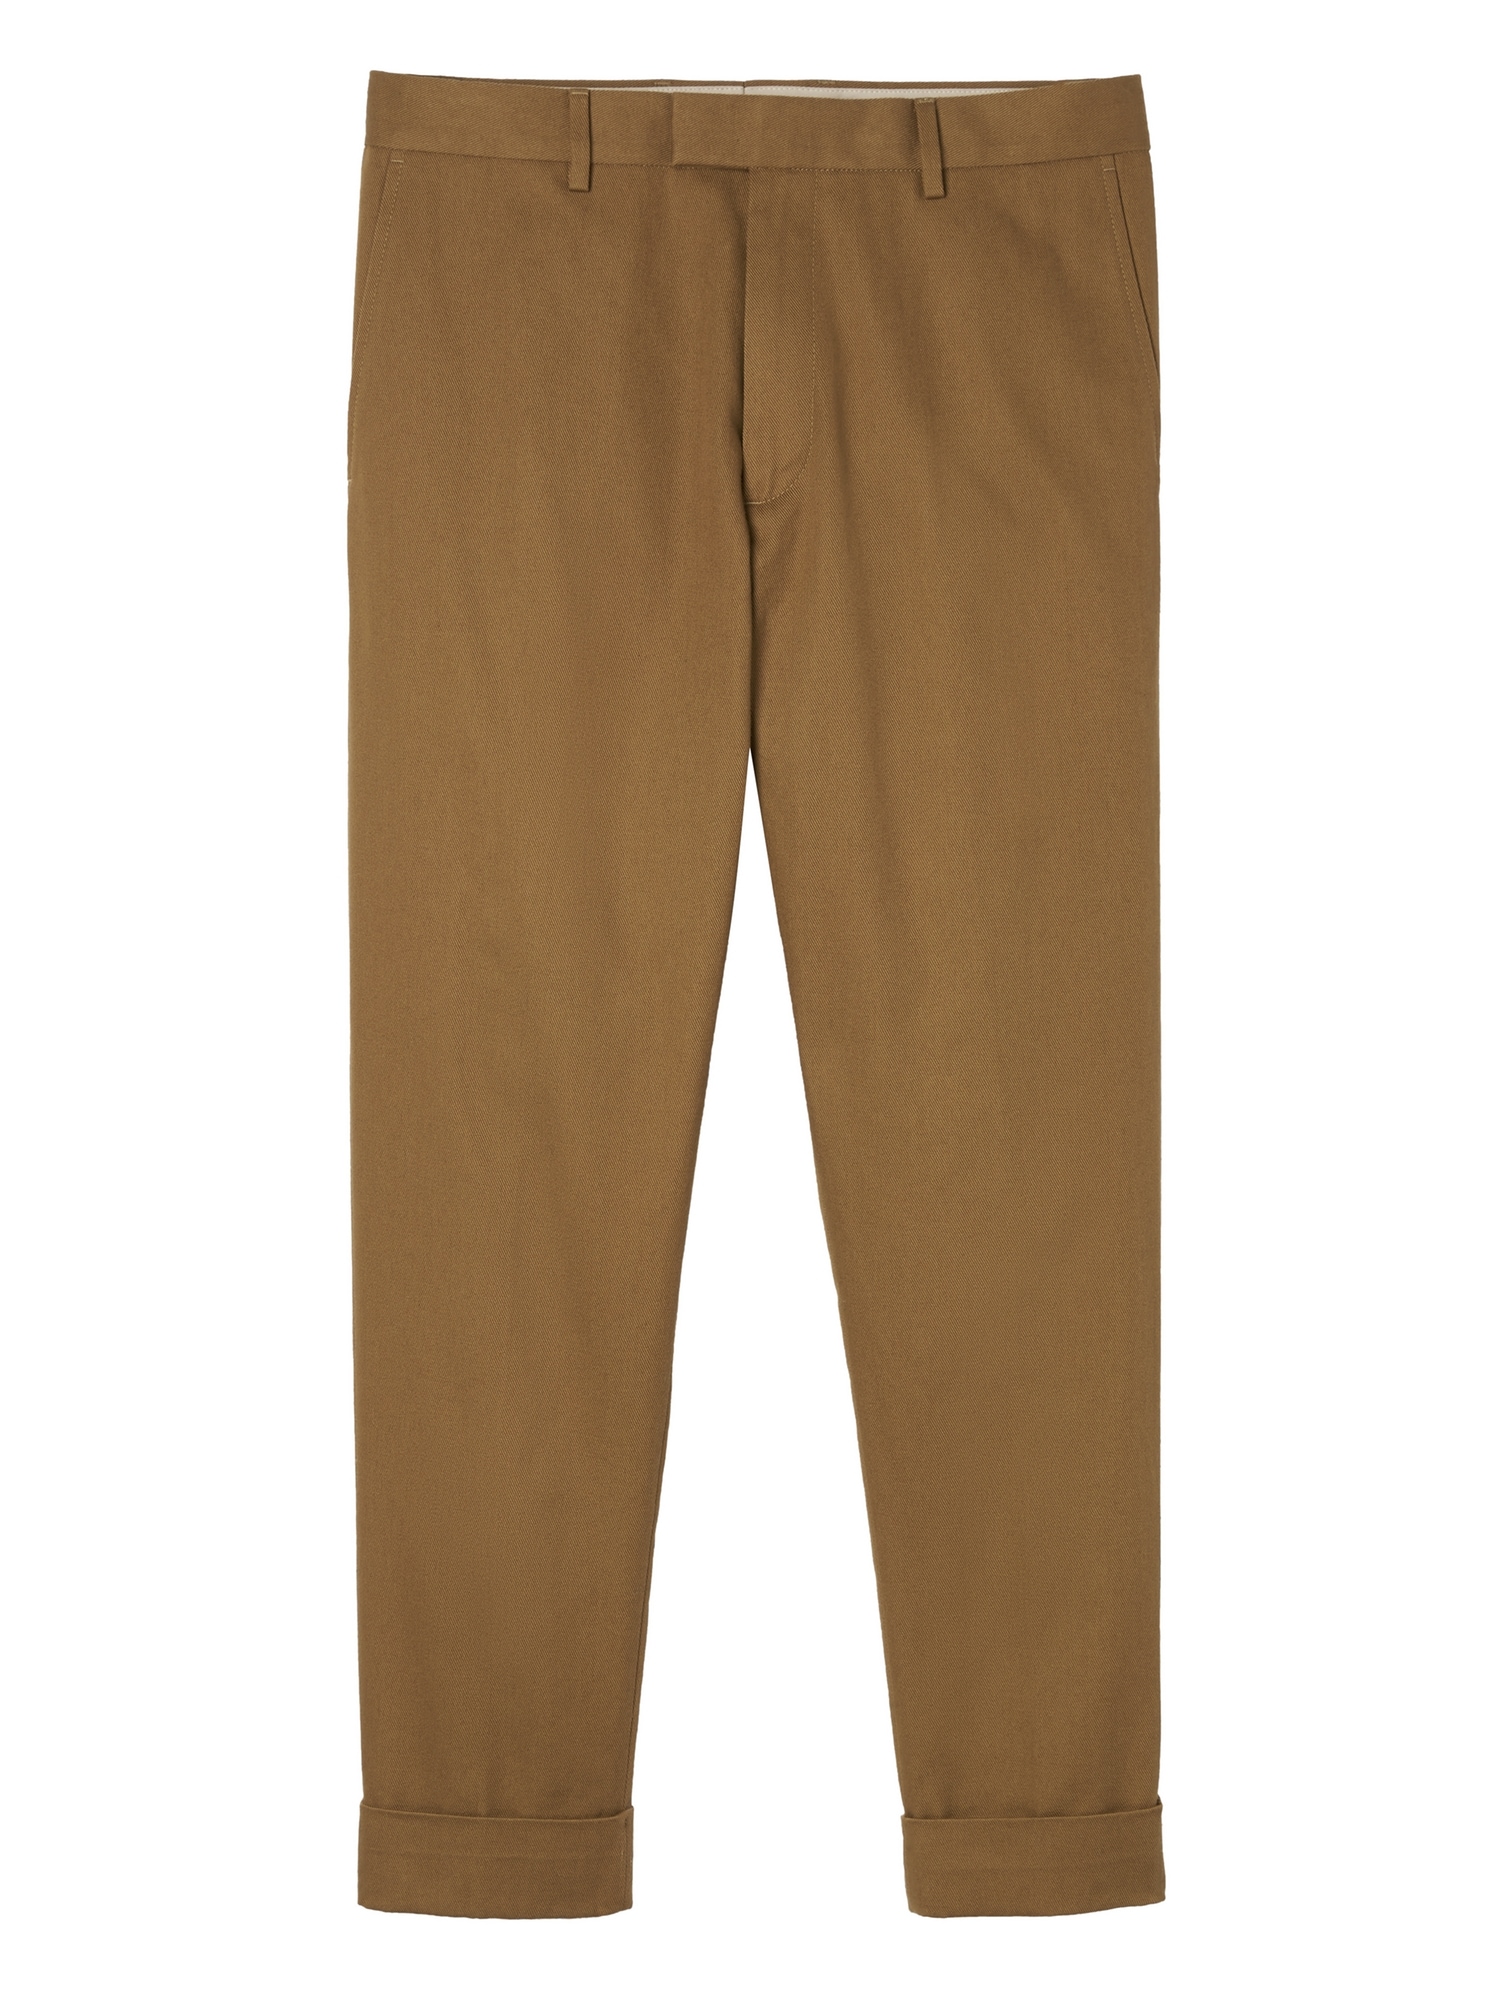 Heritage Trooper Pant with Cuffed Hem